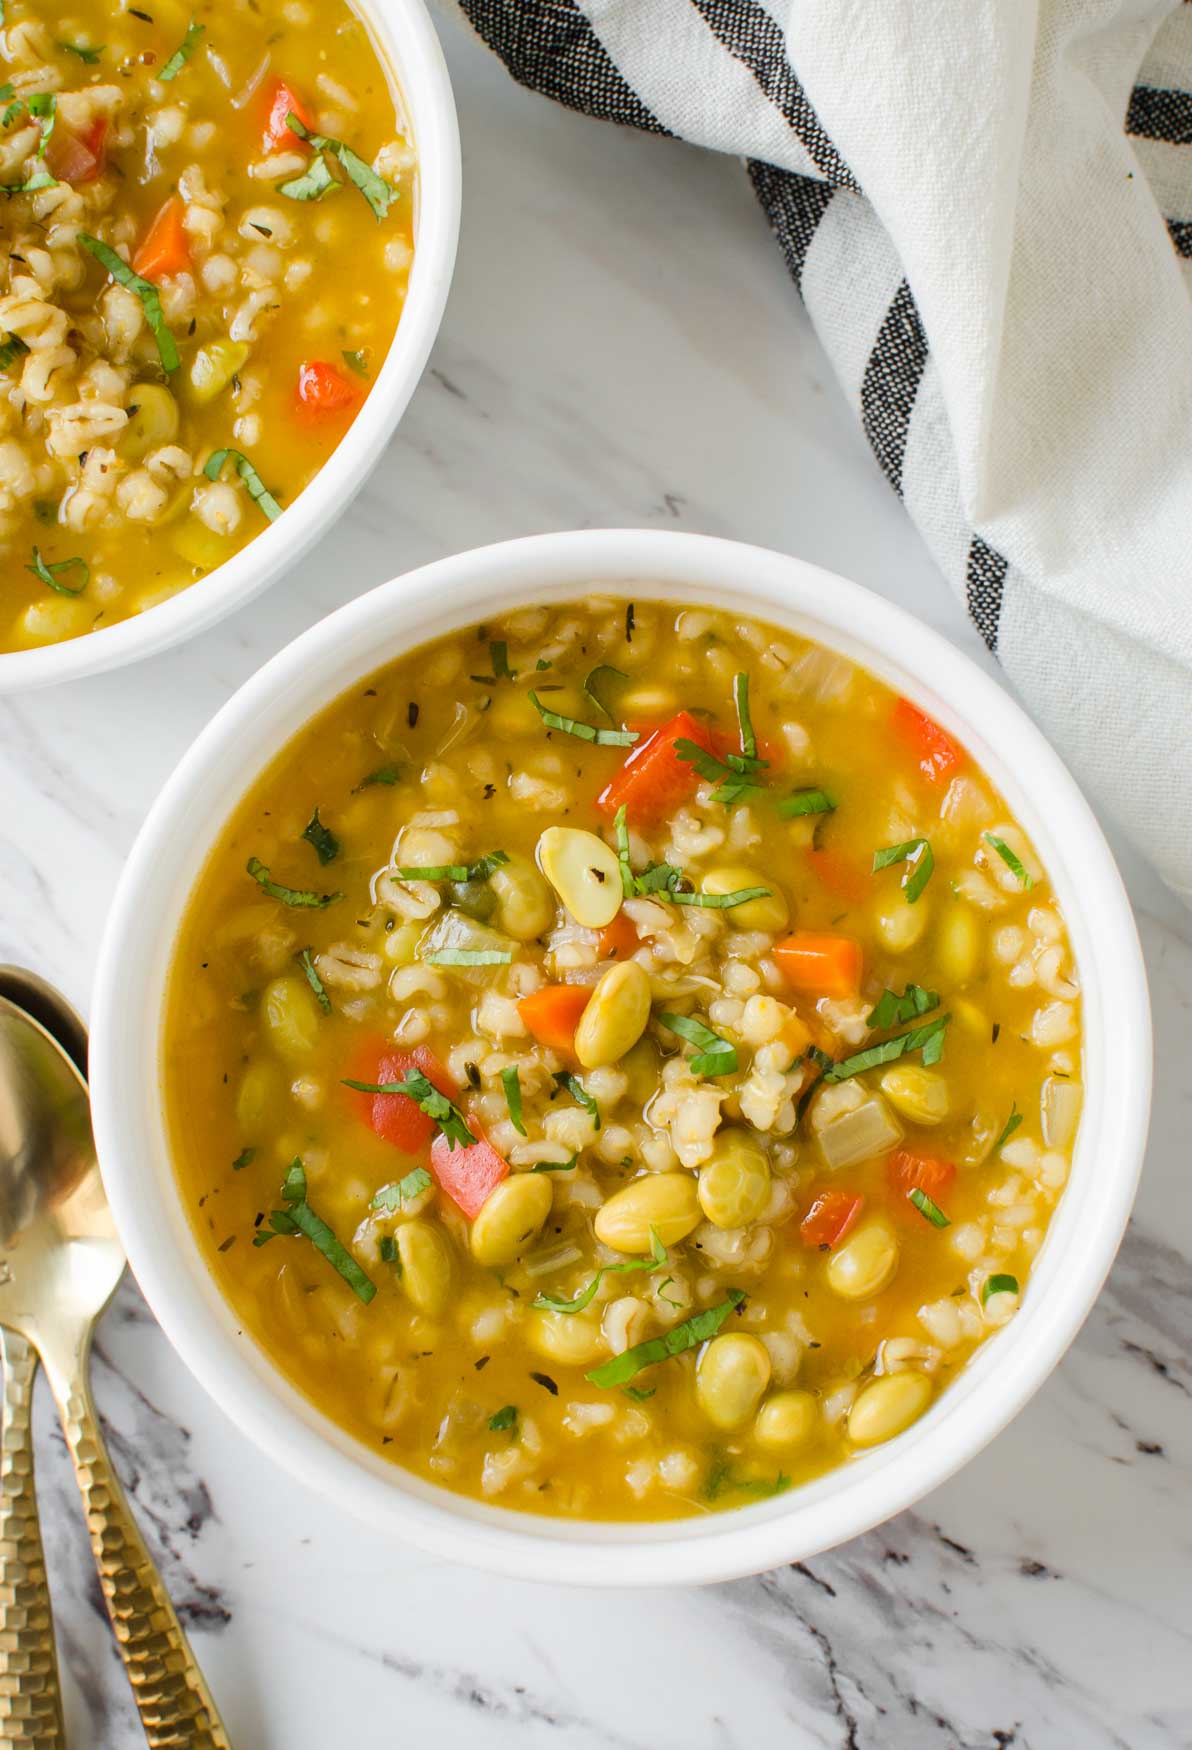 Instant Vegetable Barley Soup - Cook fresh vegetables and whole barley in the Instant Pot to make this delicious and nutritious barley soup in about 30 minutes. | # watchwhatueat # barley #barleysoup #vegan #instantpotsoup